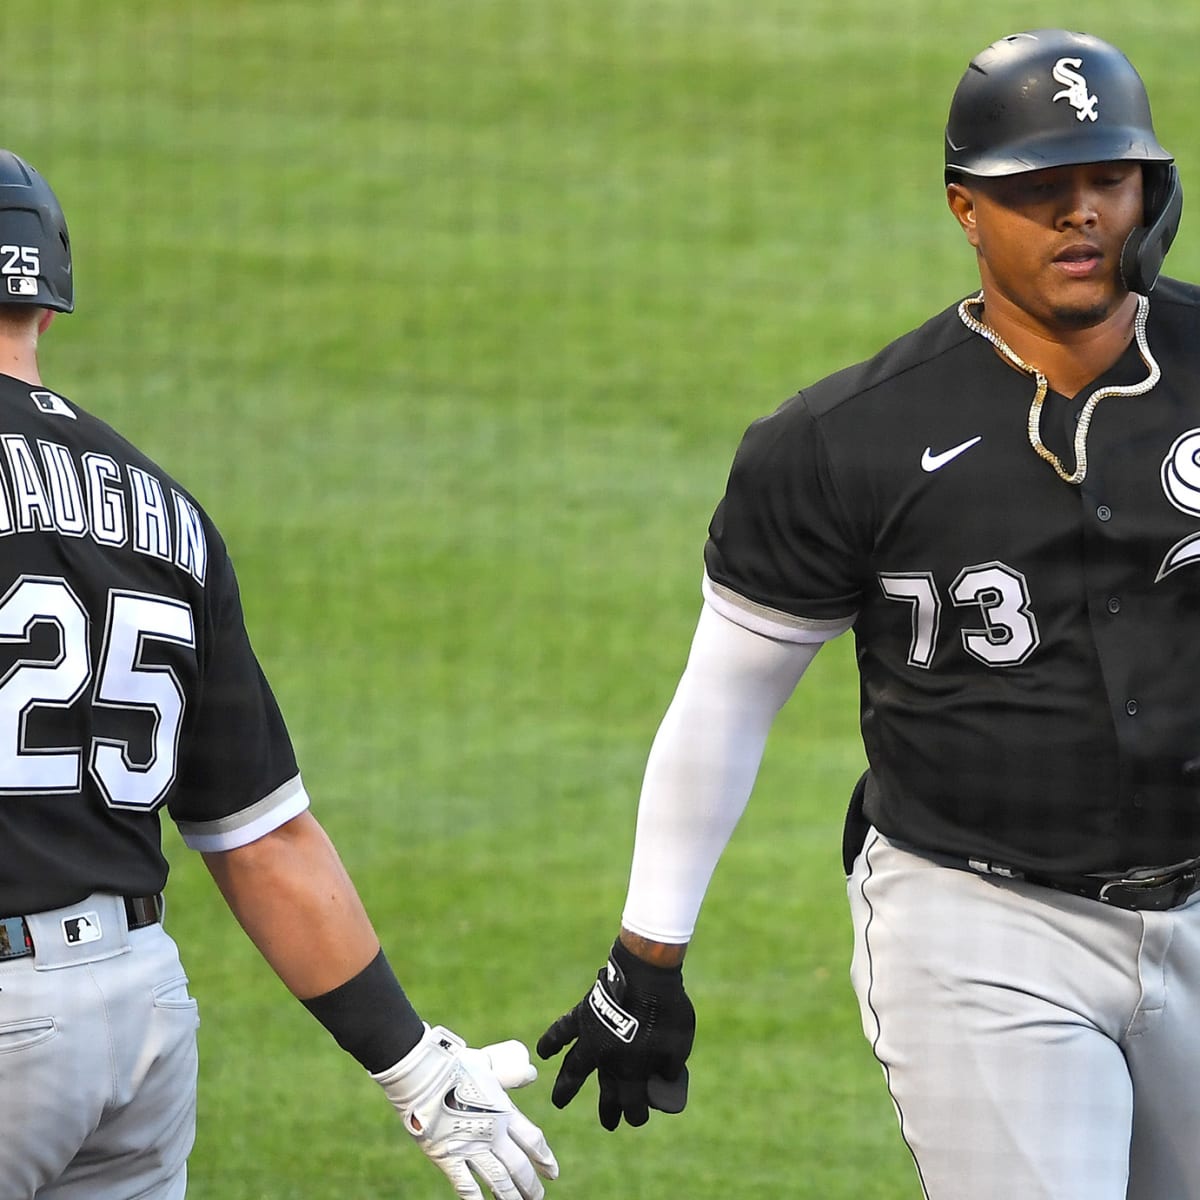 White Sox rookie Mercedes eyeing HR derby: 'I want to be there